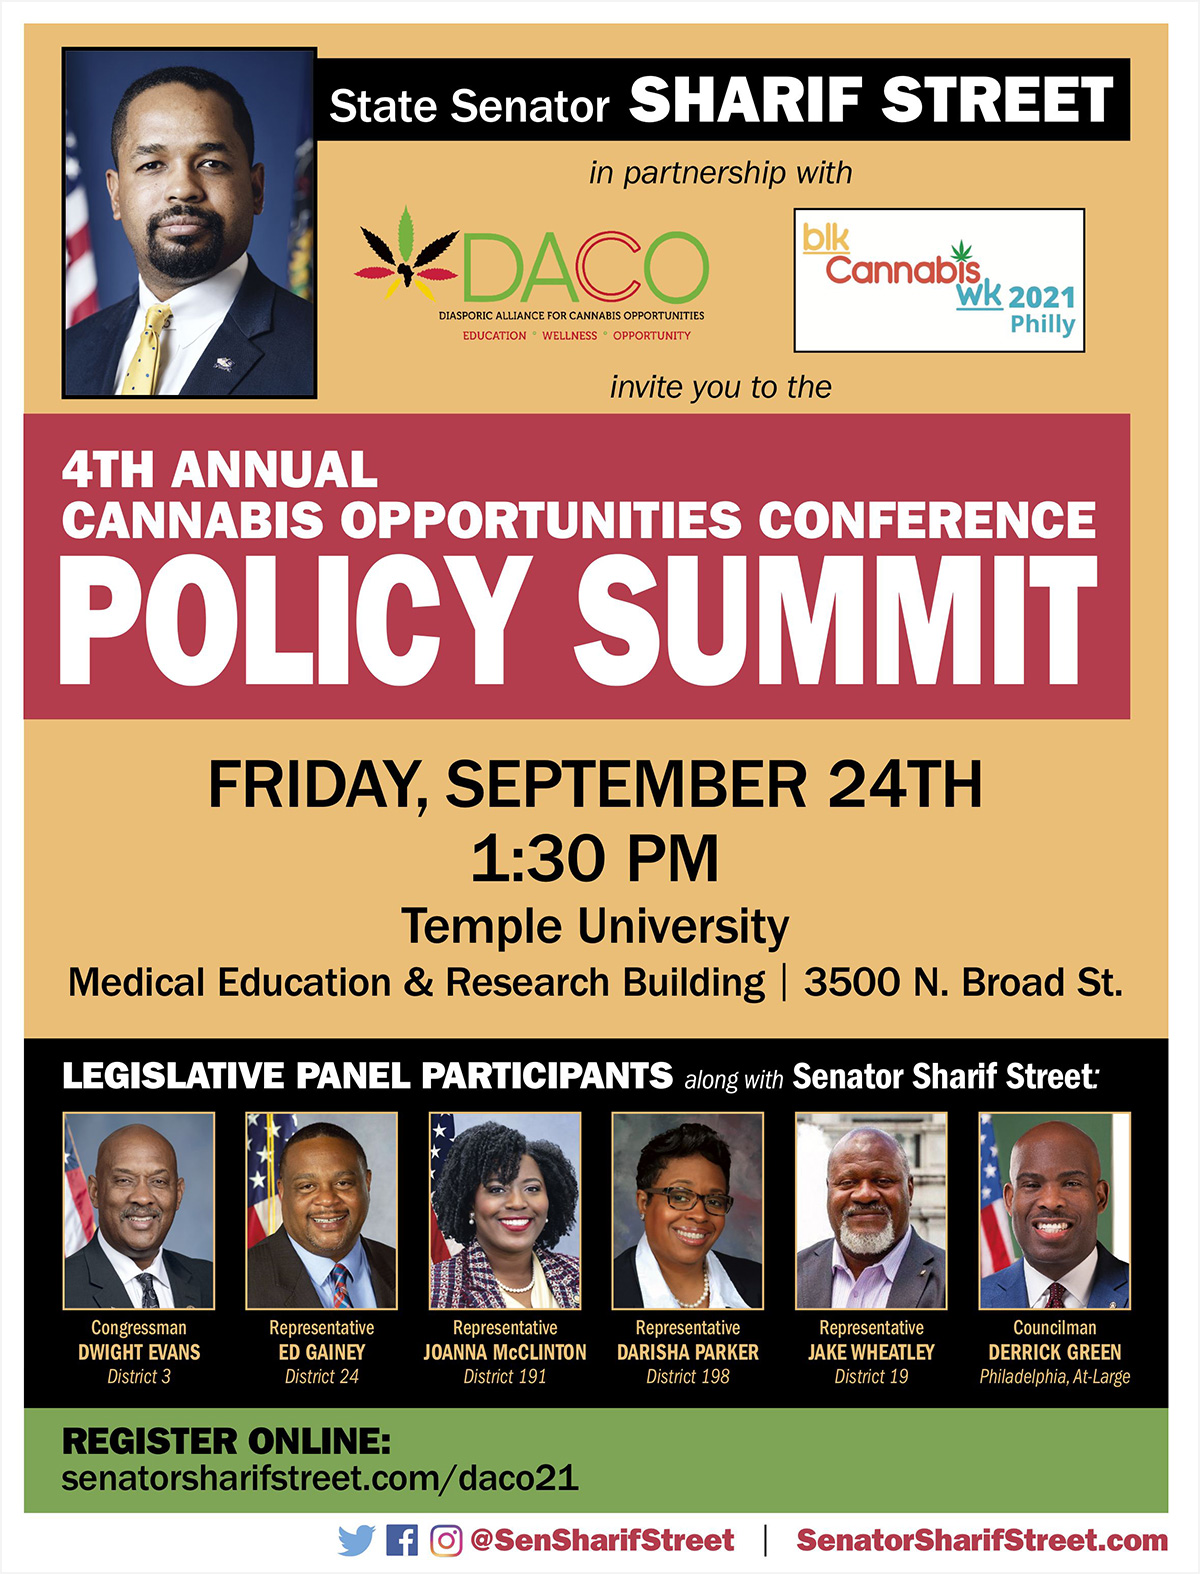 4th Annual Cannabis Opportunities Conference Policy Summit